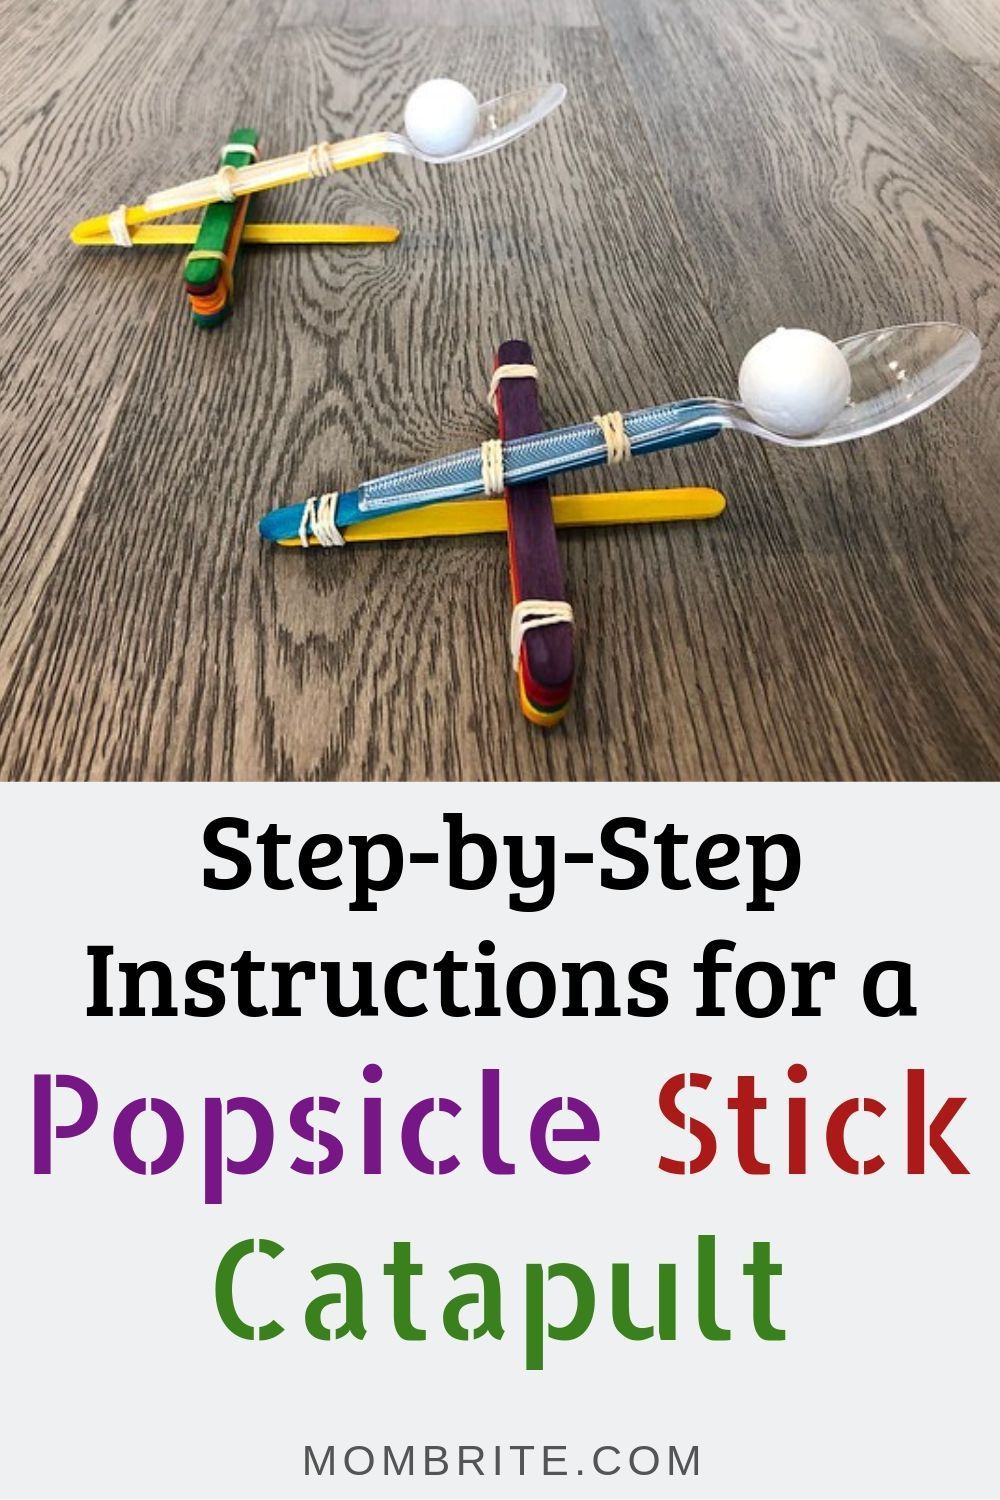 3 Simple Popsicle Stick Catapult Designs | Mombrite